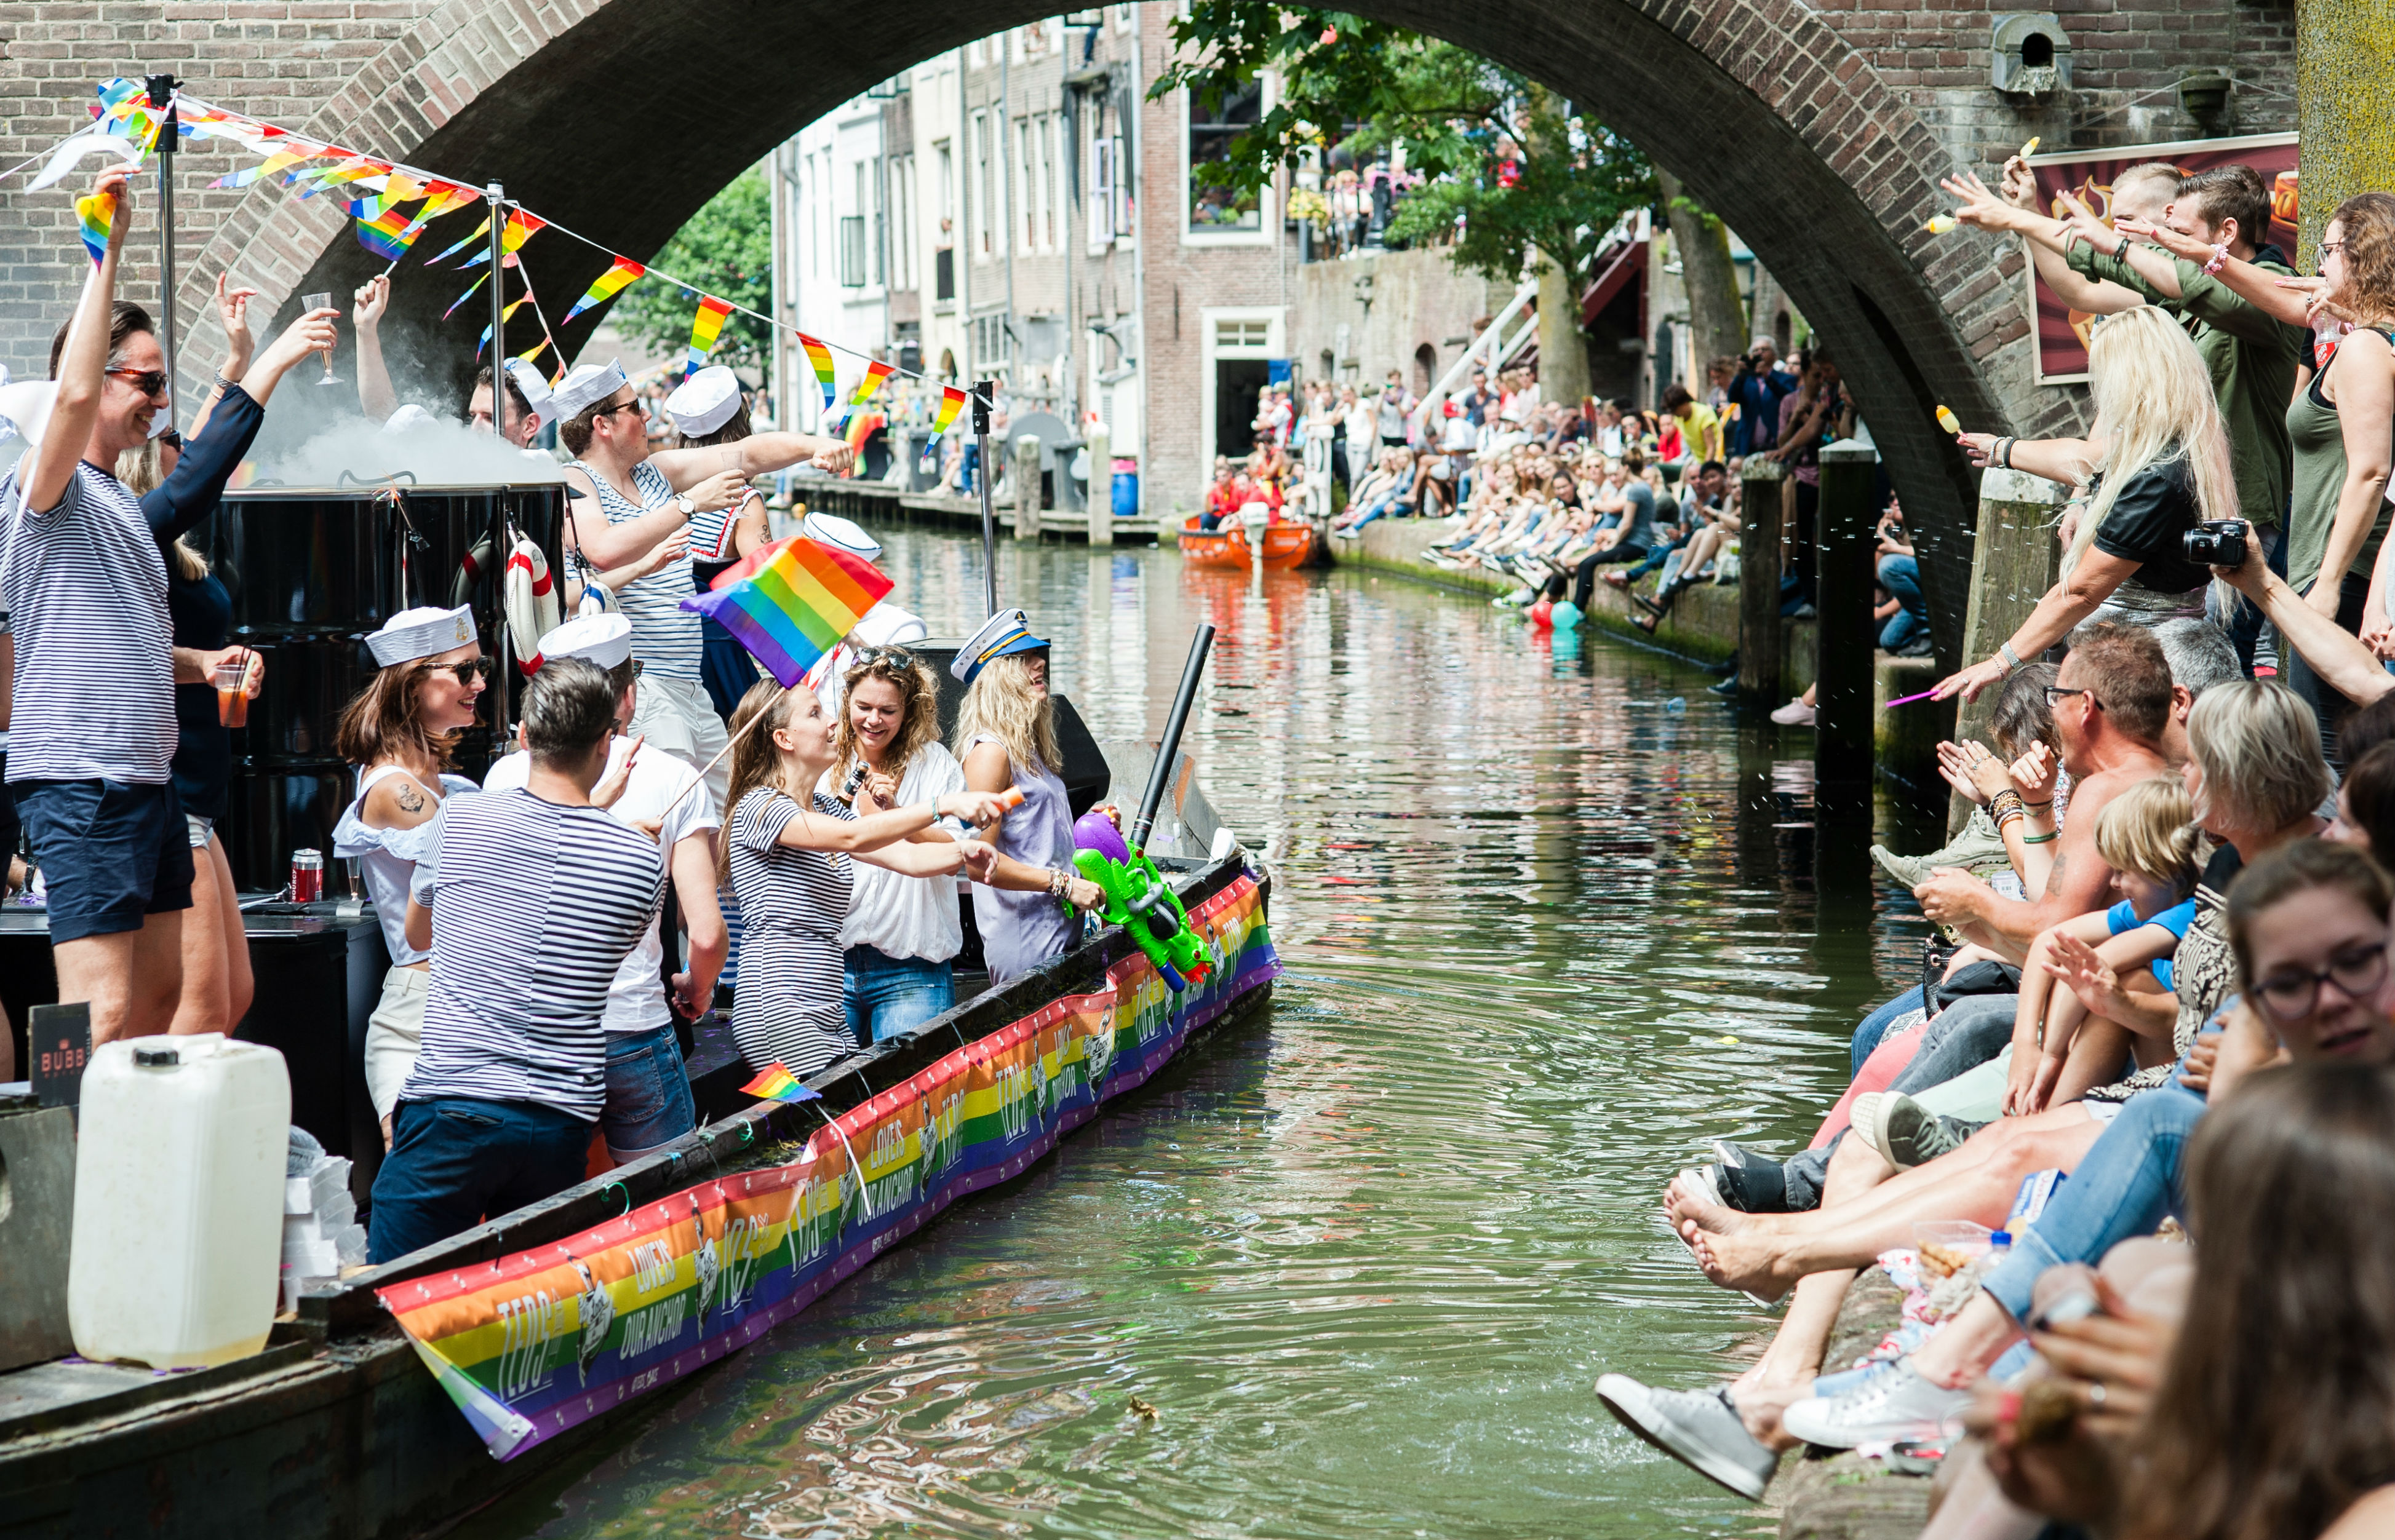 Dutch bishop withdraws permission for Gay Pride event in cathedral